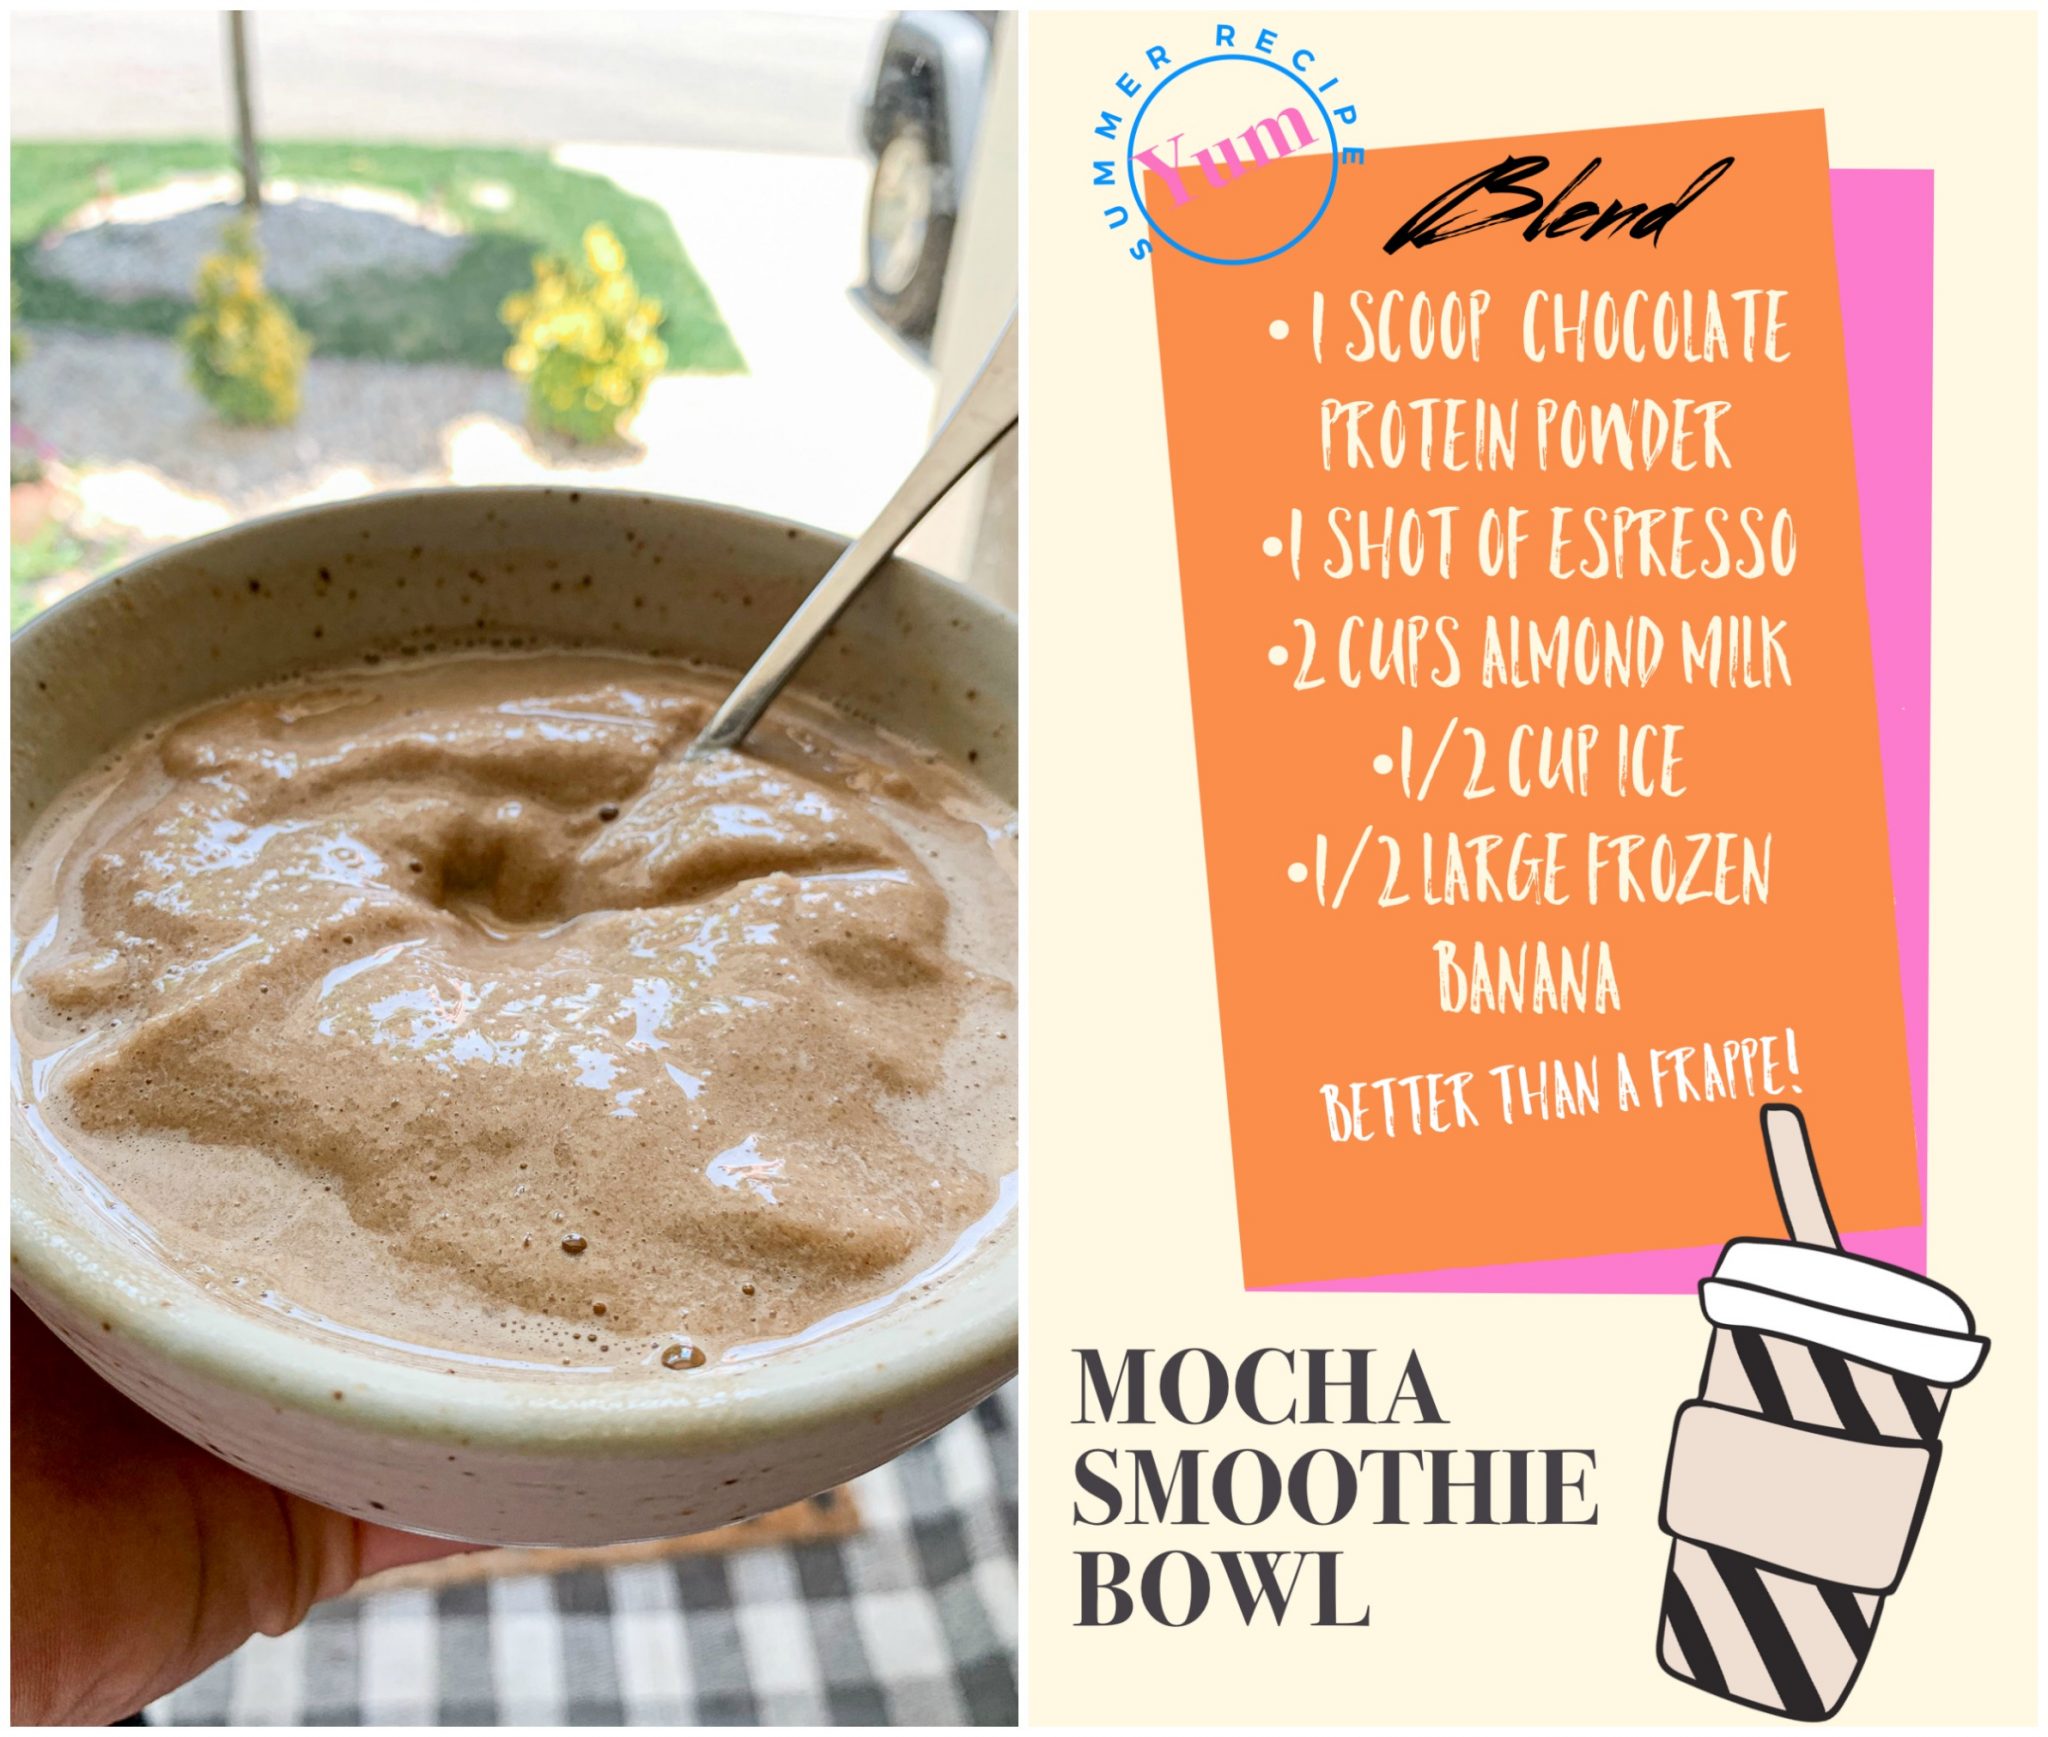 at home frappe, smoothie bowl, mocha, gluten free, dairy free, plant based, healthy, recipe, vegan